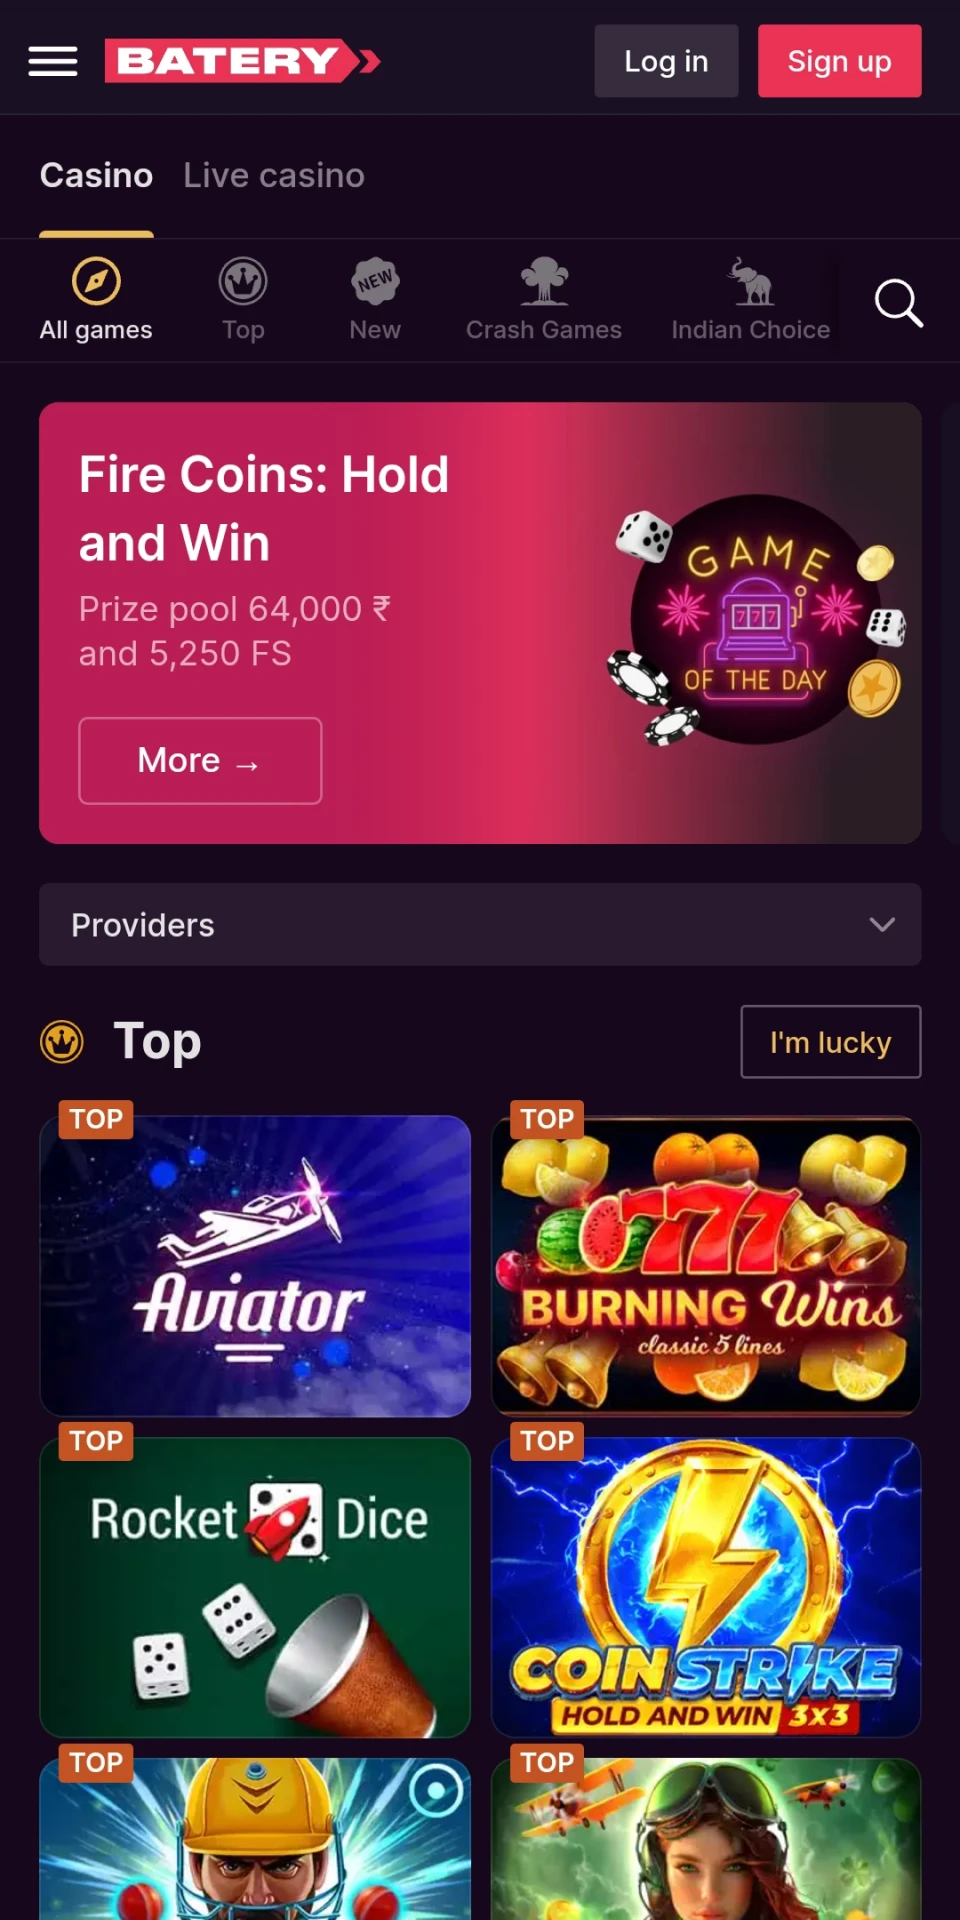 Play your favorite casino games on the Batery mobile app.